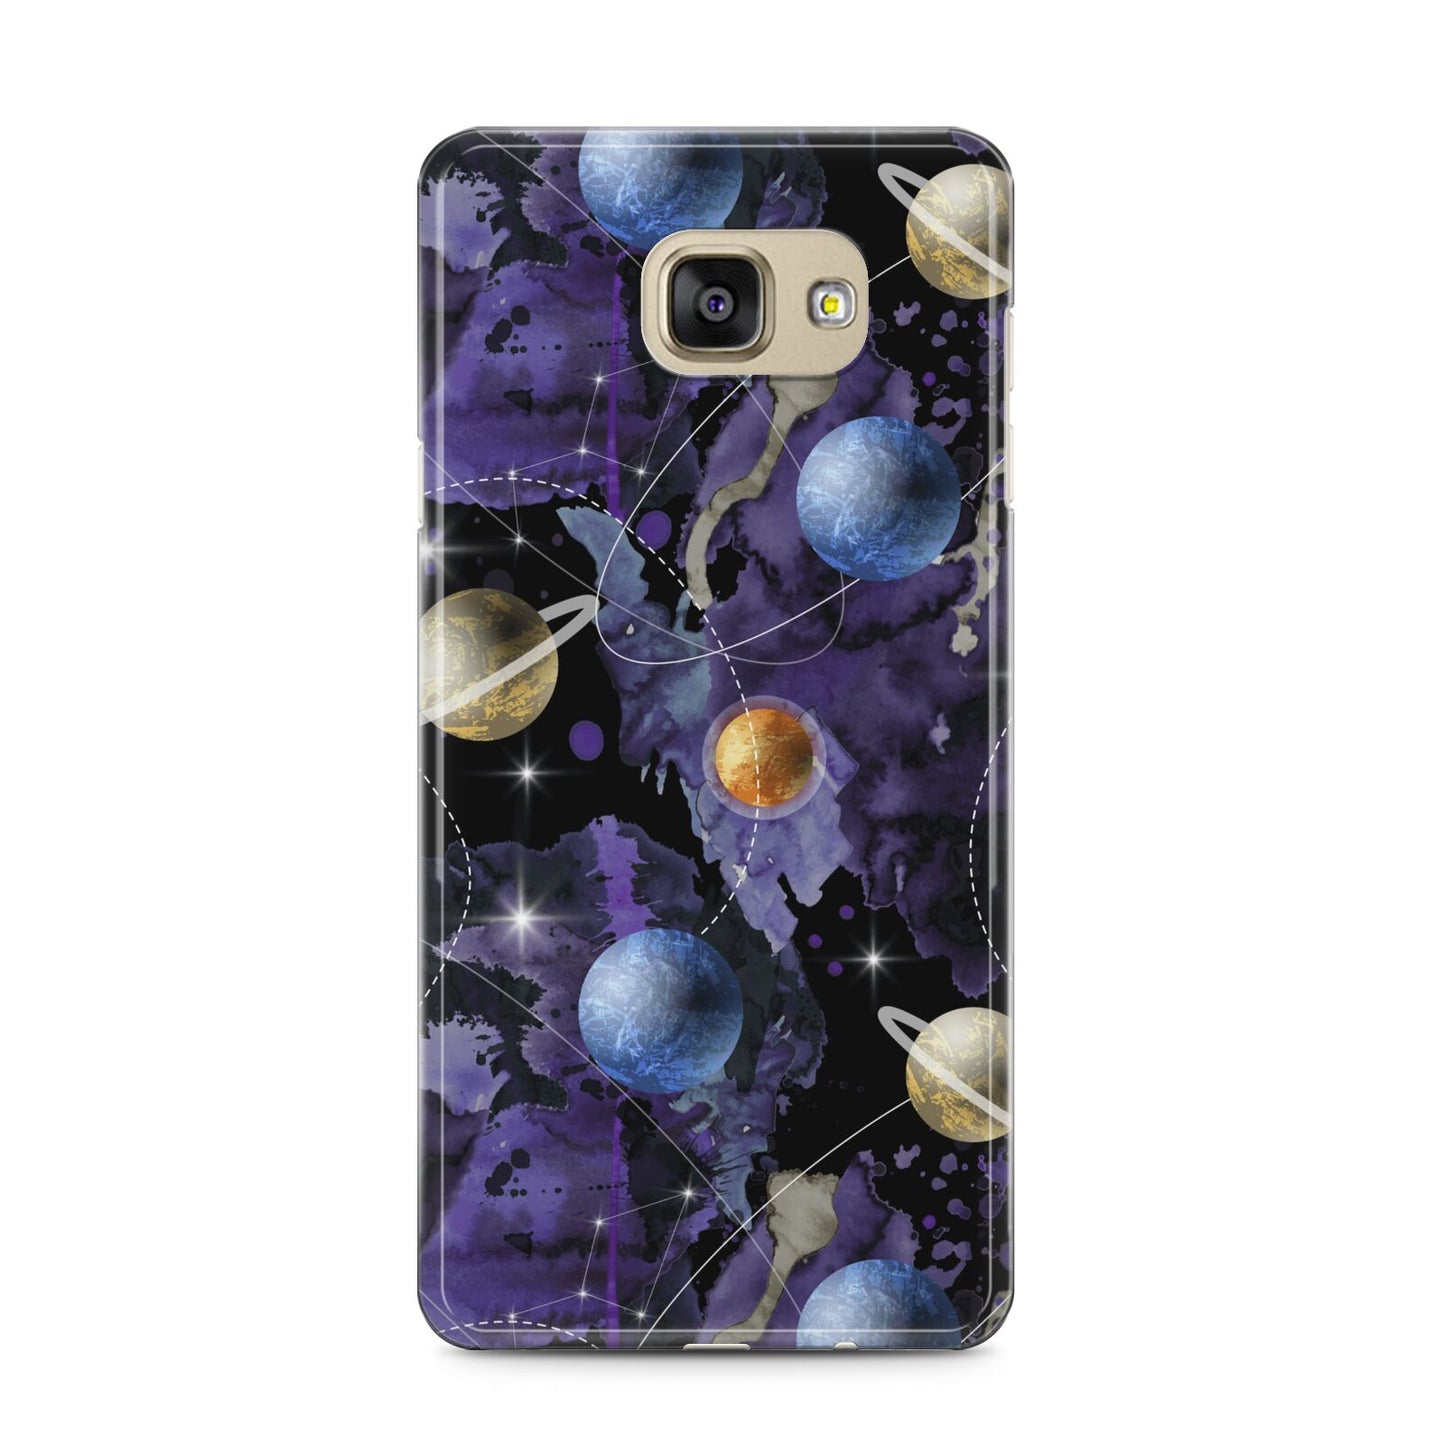 Planet Samsung Galaxy A5 2016 Case on gold phone